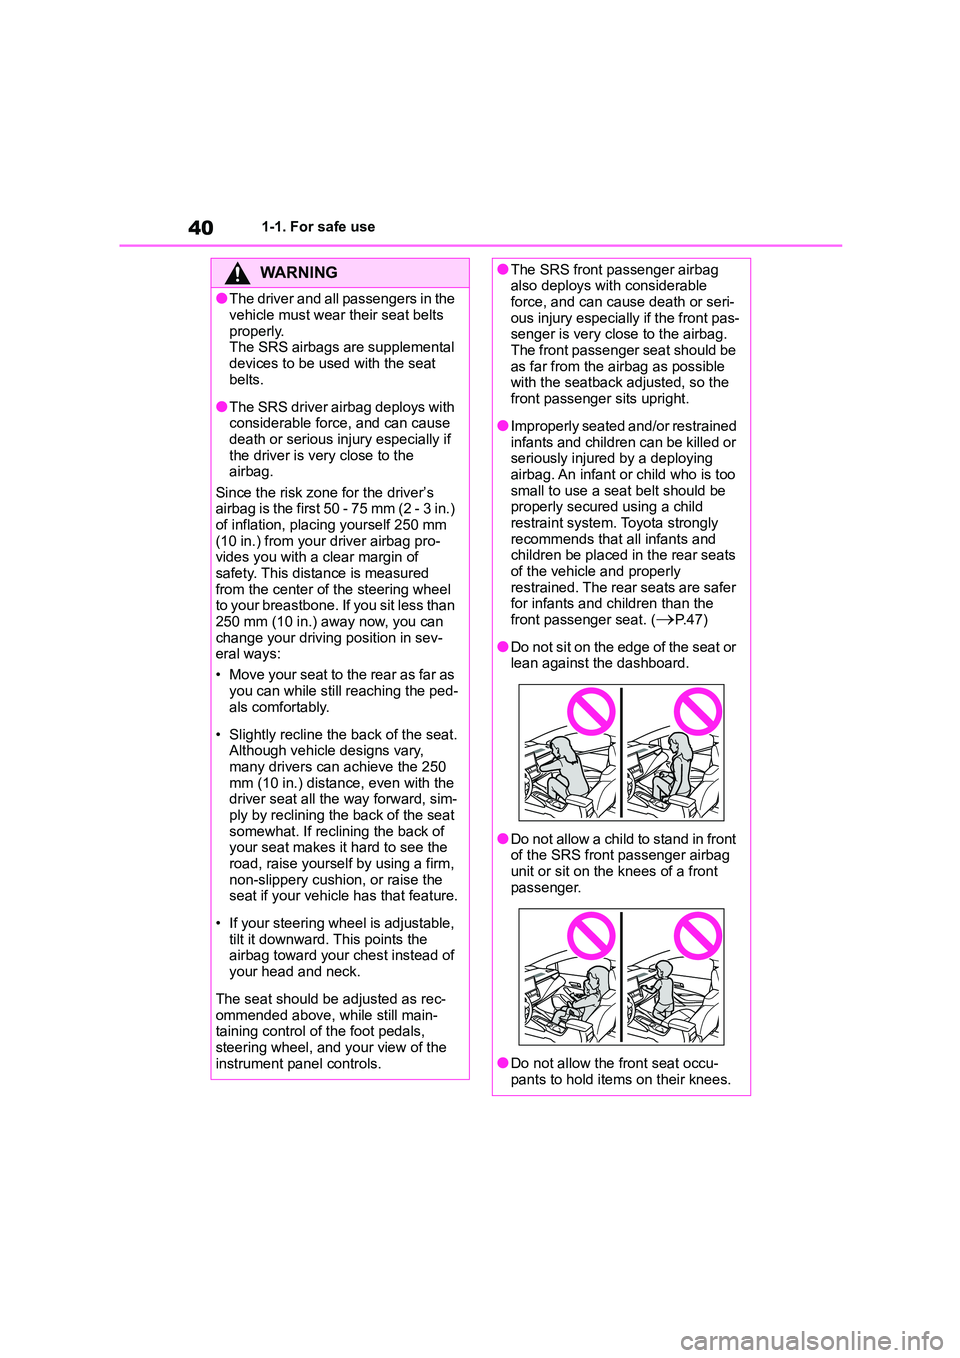 TOYOTA COROLLA 2022  Owners Manual (in English) 401-1. For safe use
WA R N I N G
●The driver and all passengers in the  
vehicle must wear their seat belts 
properly. The SRS airbags are supplemental  
devices to be used with the seat 
belts.
●